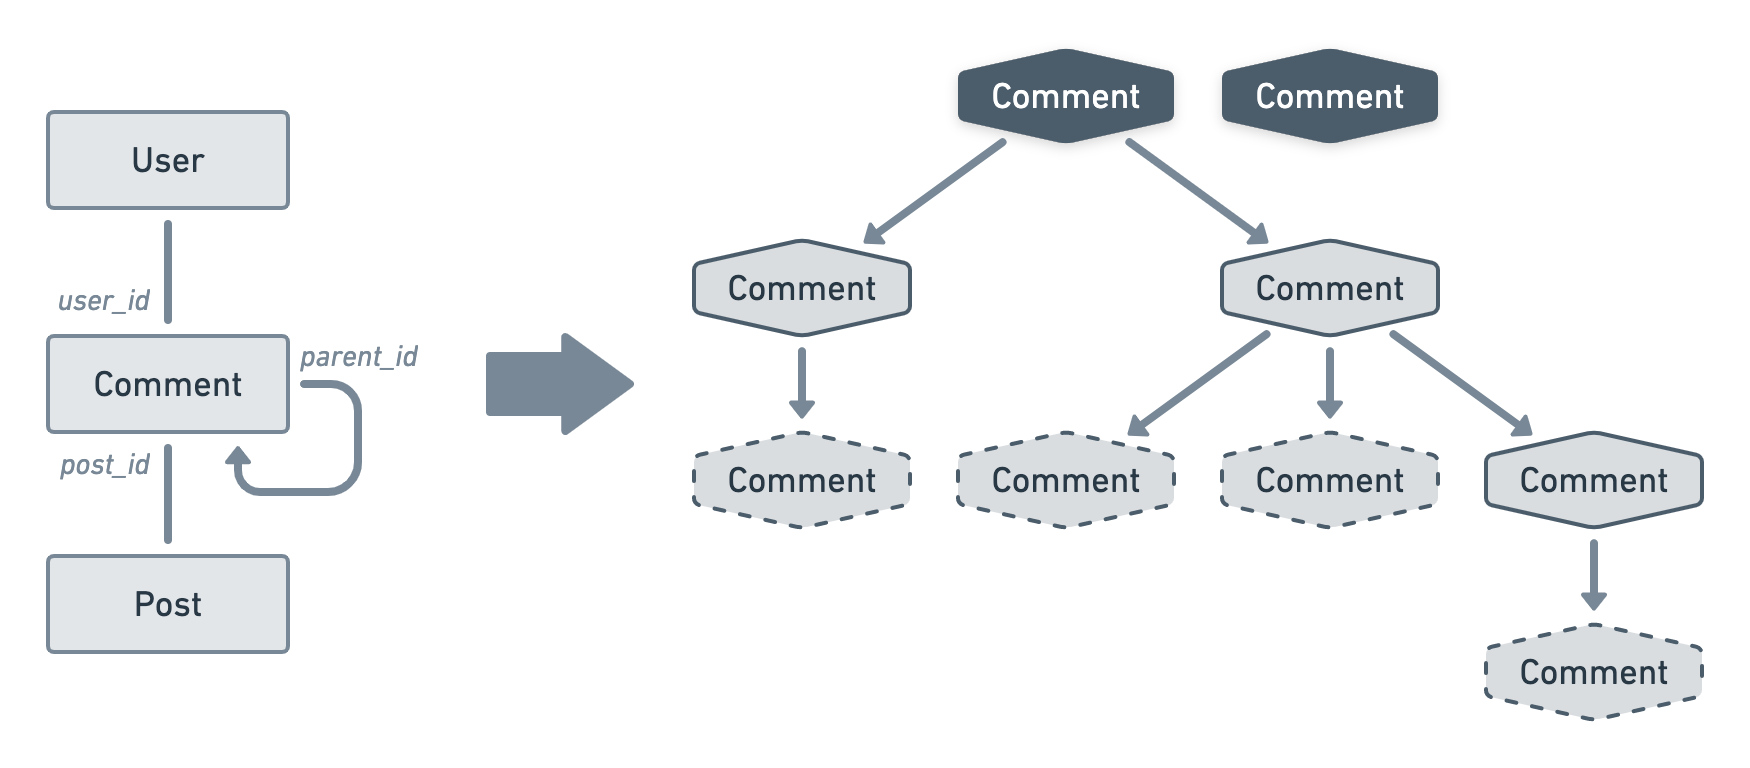 A simple ER diagram showing a User model attached to a Comment model itself attached to a Post model. The Comment model shows an arrow going to itself with "parent_id" written next to it. On the right side of the ER diagram there is an arrow pointing right and a nested node cluster made of comments next to it.